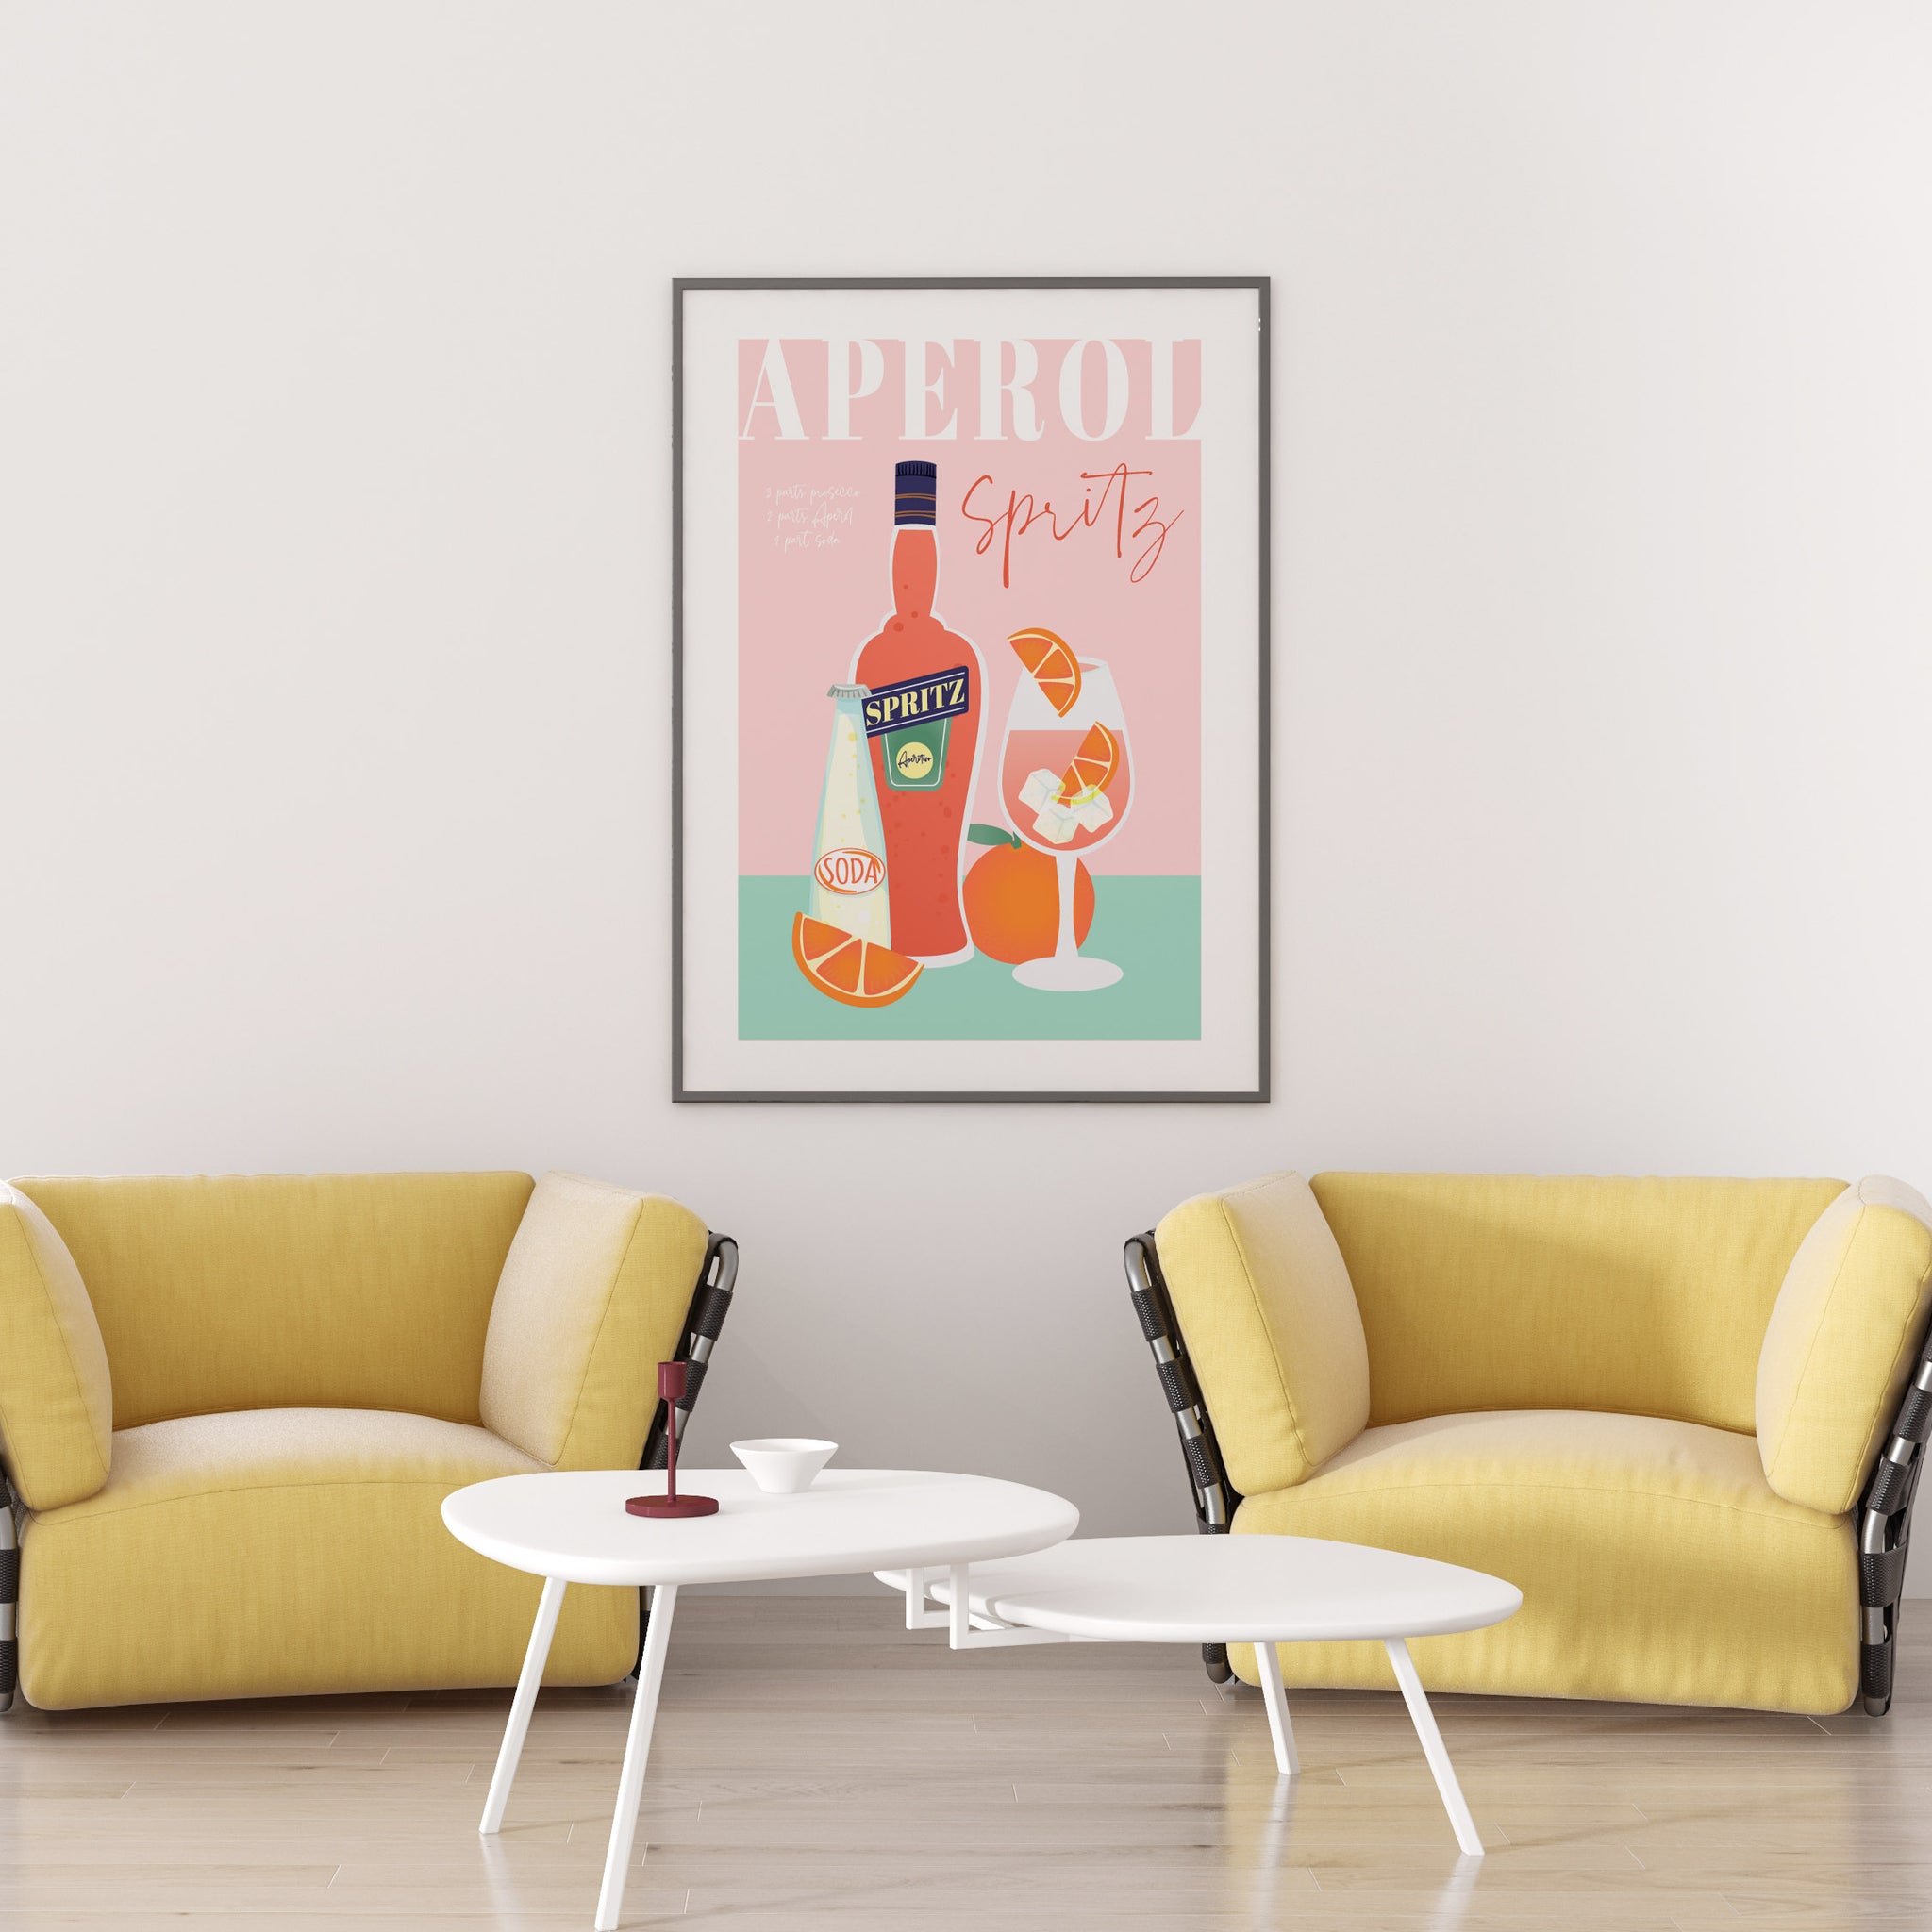 Aperol Spritz Cocktail Print  The perfect poster for aspiring